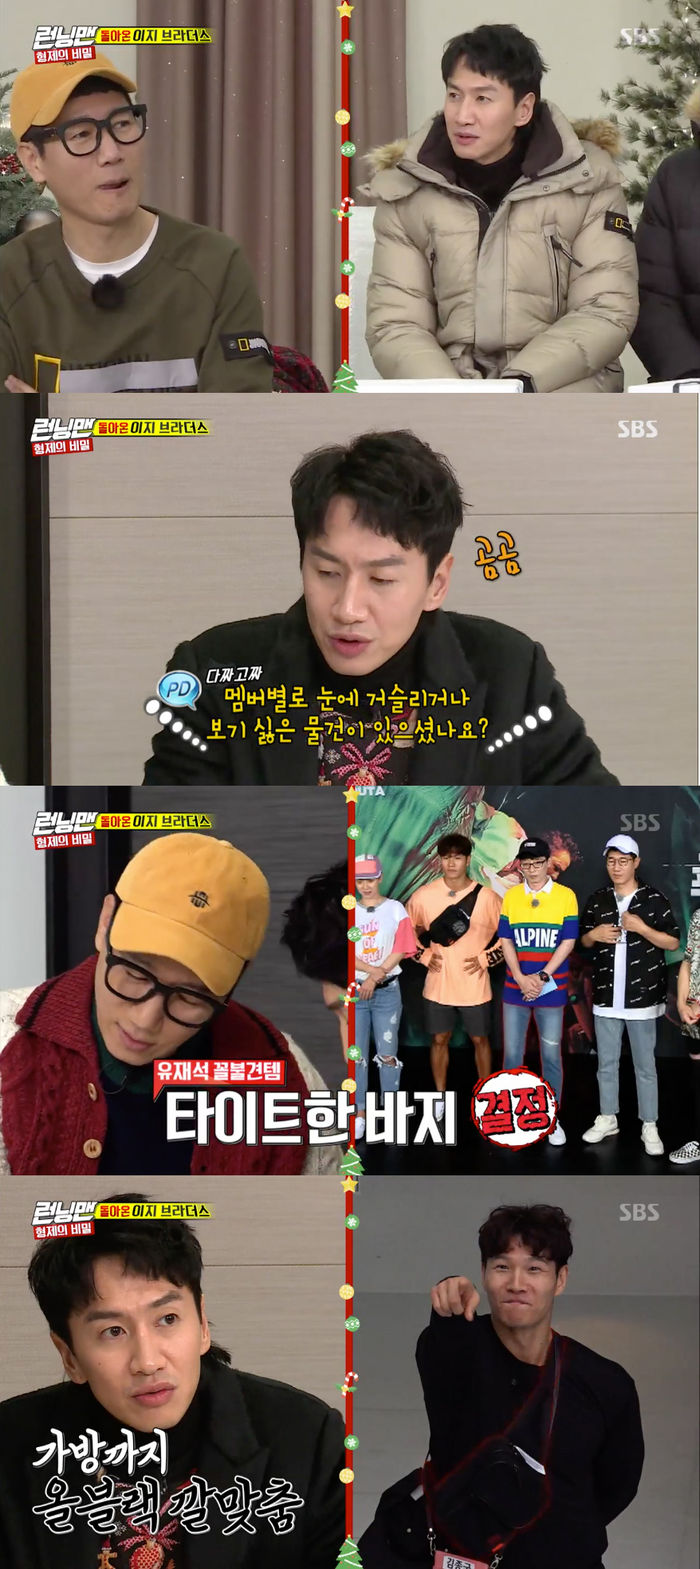 Can Lee Kwang-soo and Ji Suk-jin get revenge on the members?On SBS Running Man broadcast on the 30th, Easy Brothers was pictured trying to carry out a Secret mission.On this day, Ji Suk-jin and Lee Kwang-soo conducted a Secret mission with the Returning Easy Brothers race.The production team asked Easy Brothers to select the unfavorable items of each member, and the two cited Yoo Jae-Suks tight pants, Kim Jong-kooks black bag, and Song Ji-hyos hat.At this time, Lee Kwang-soo said, I hope I will get rid of Hahas cell phone. I hope that Dong-hoon loses his cell phone every week.Hahas cell phone contained a variety of humiliating photos and videos of the members, so the two agreed that they wanted to get rid of Hahas cell phone.The mission given to the two people was successful if they stole all the members unseen items and hid them in a fixed pRace. Especially, they also attracted attention by appearing helpers to help the two.Lee Kwang-soo continued to search around the pRace to steal the members items. Yang Se-chan, who saw it, interfered with his mission by suspecting that Gwangsu-hyung is suspicious.